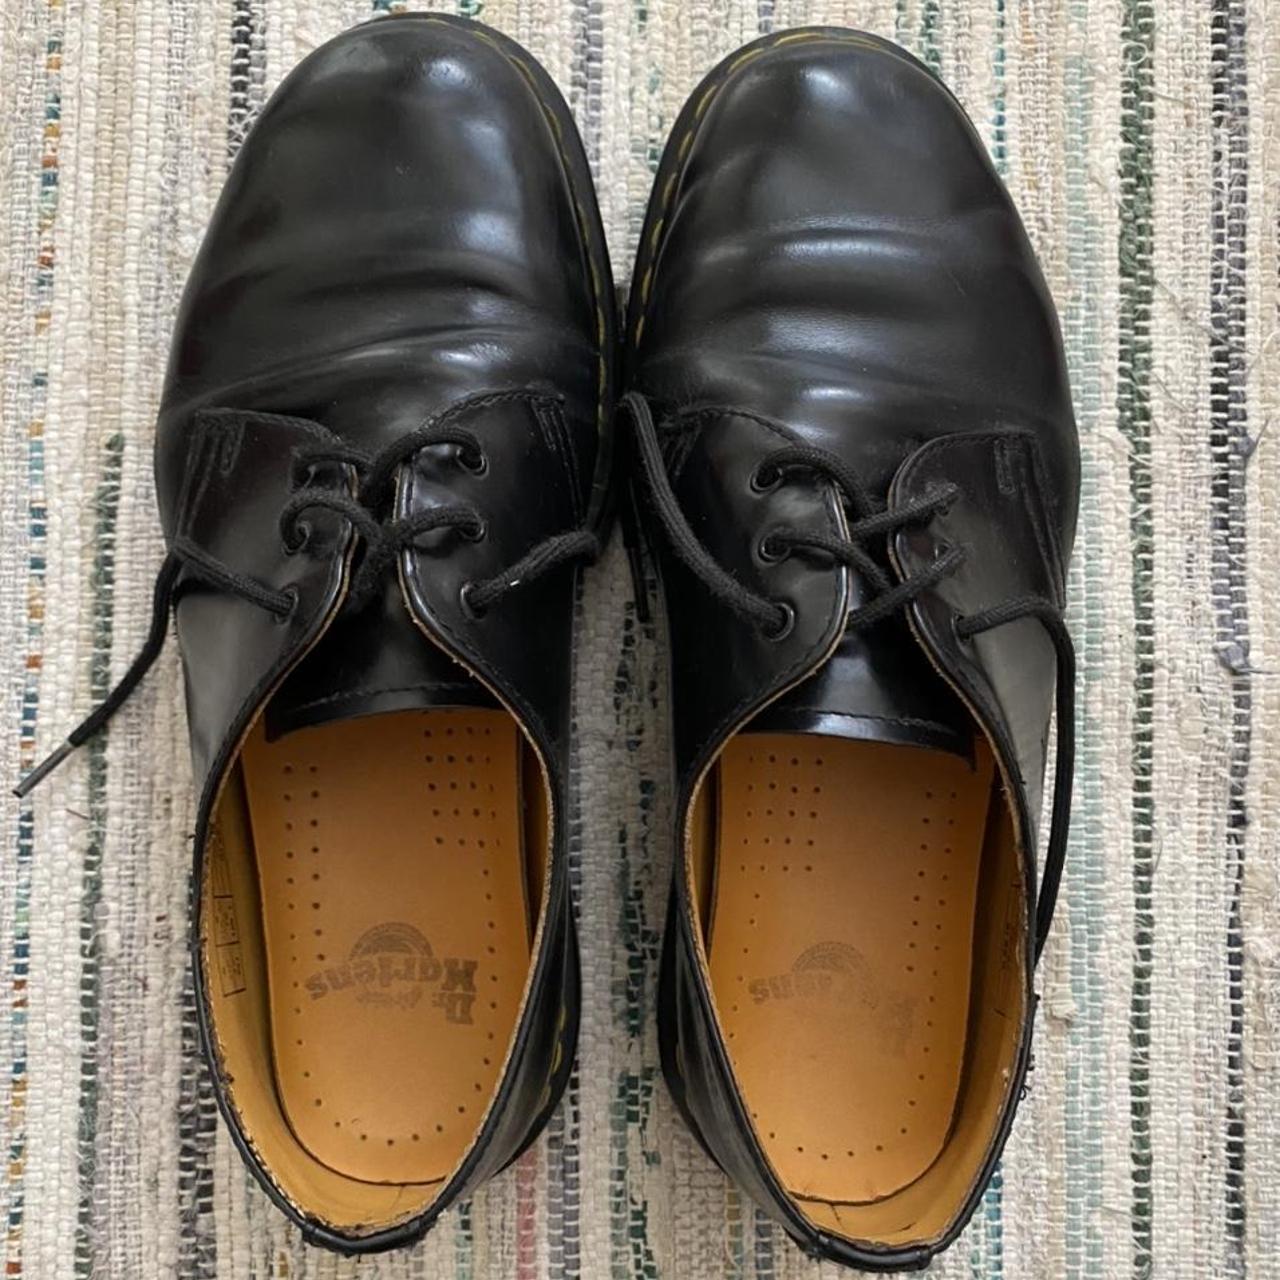 Black 1461 Doc Martens. Used as school shoes for 2... - Depop